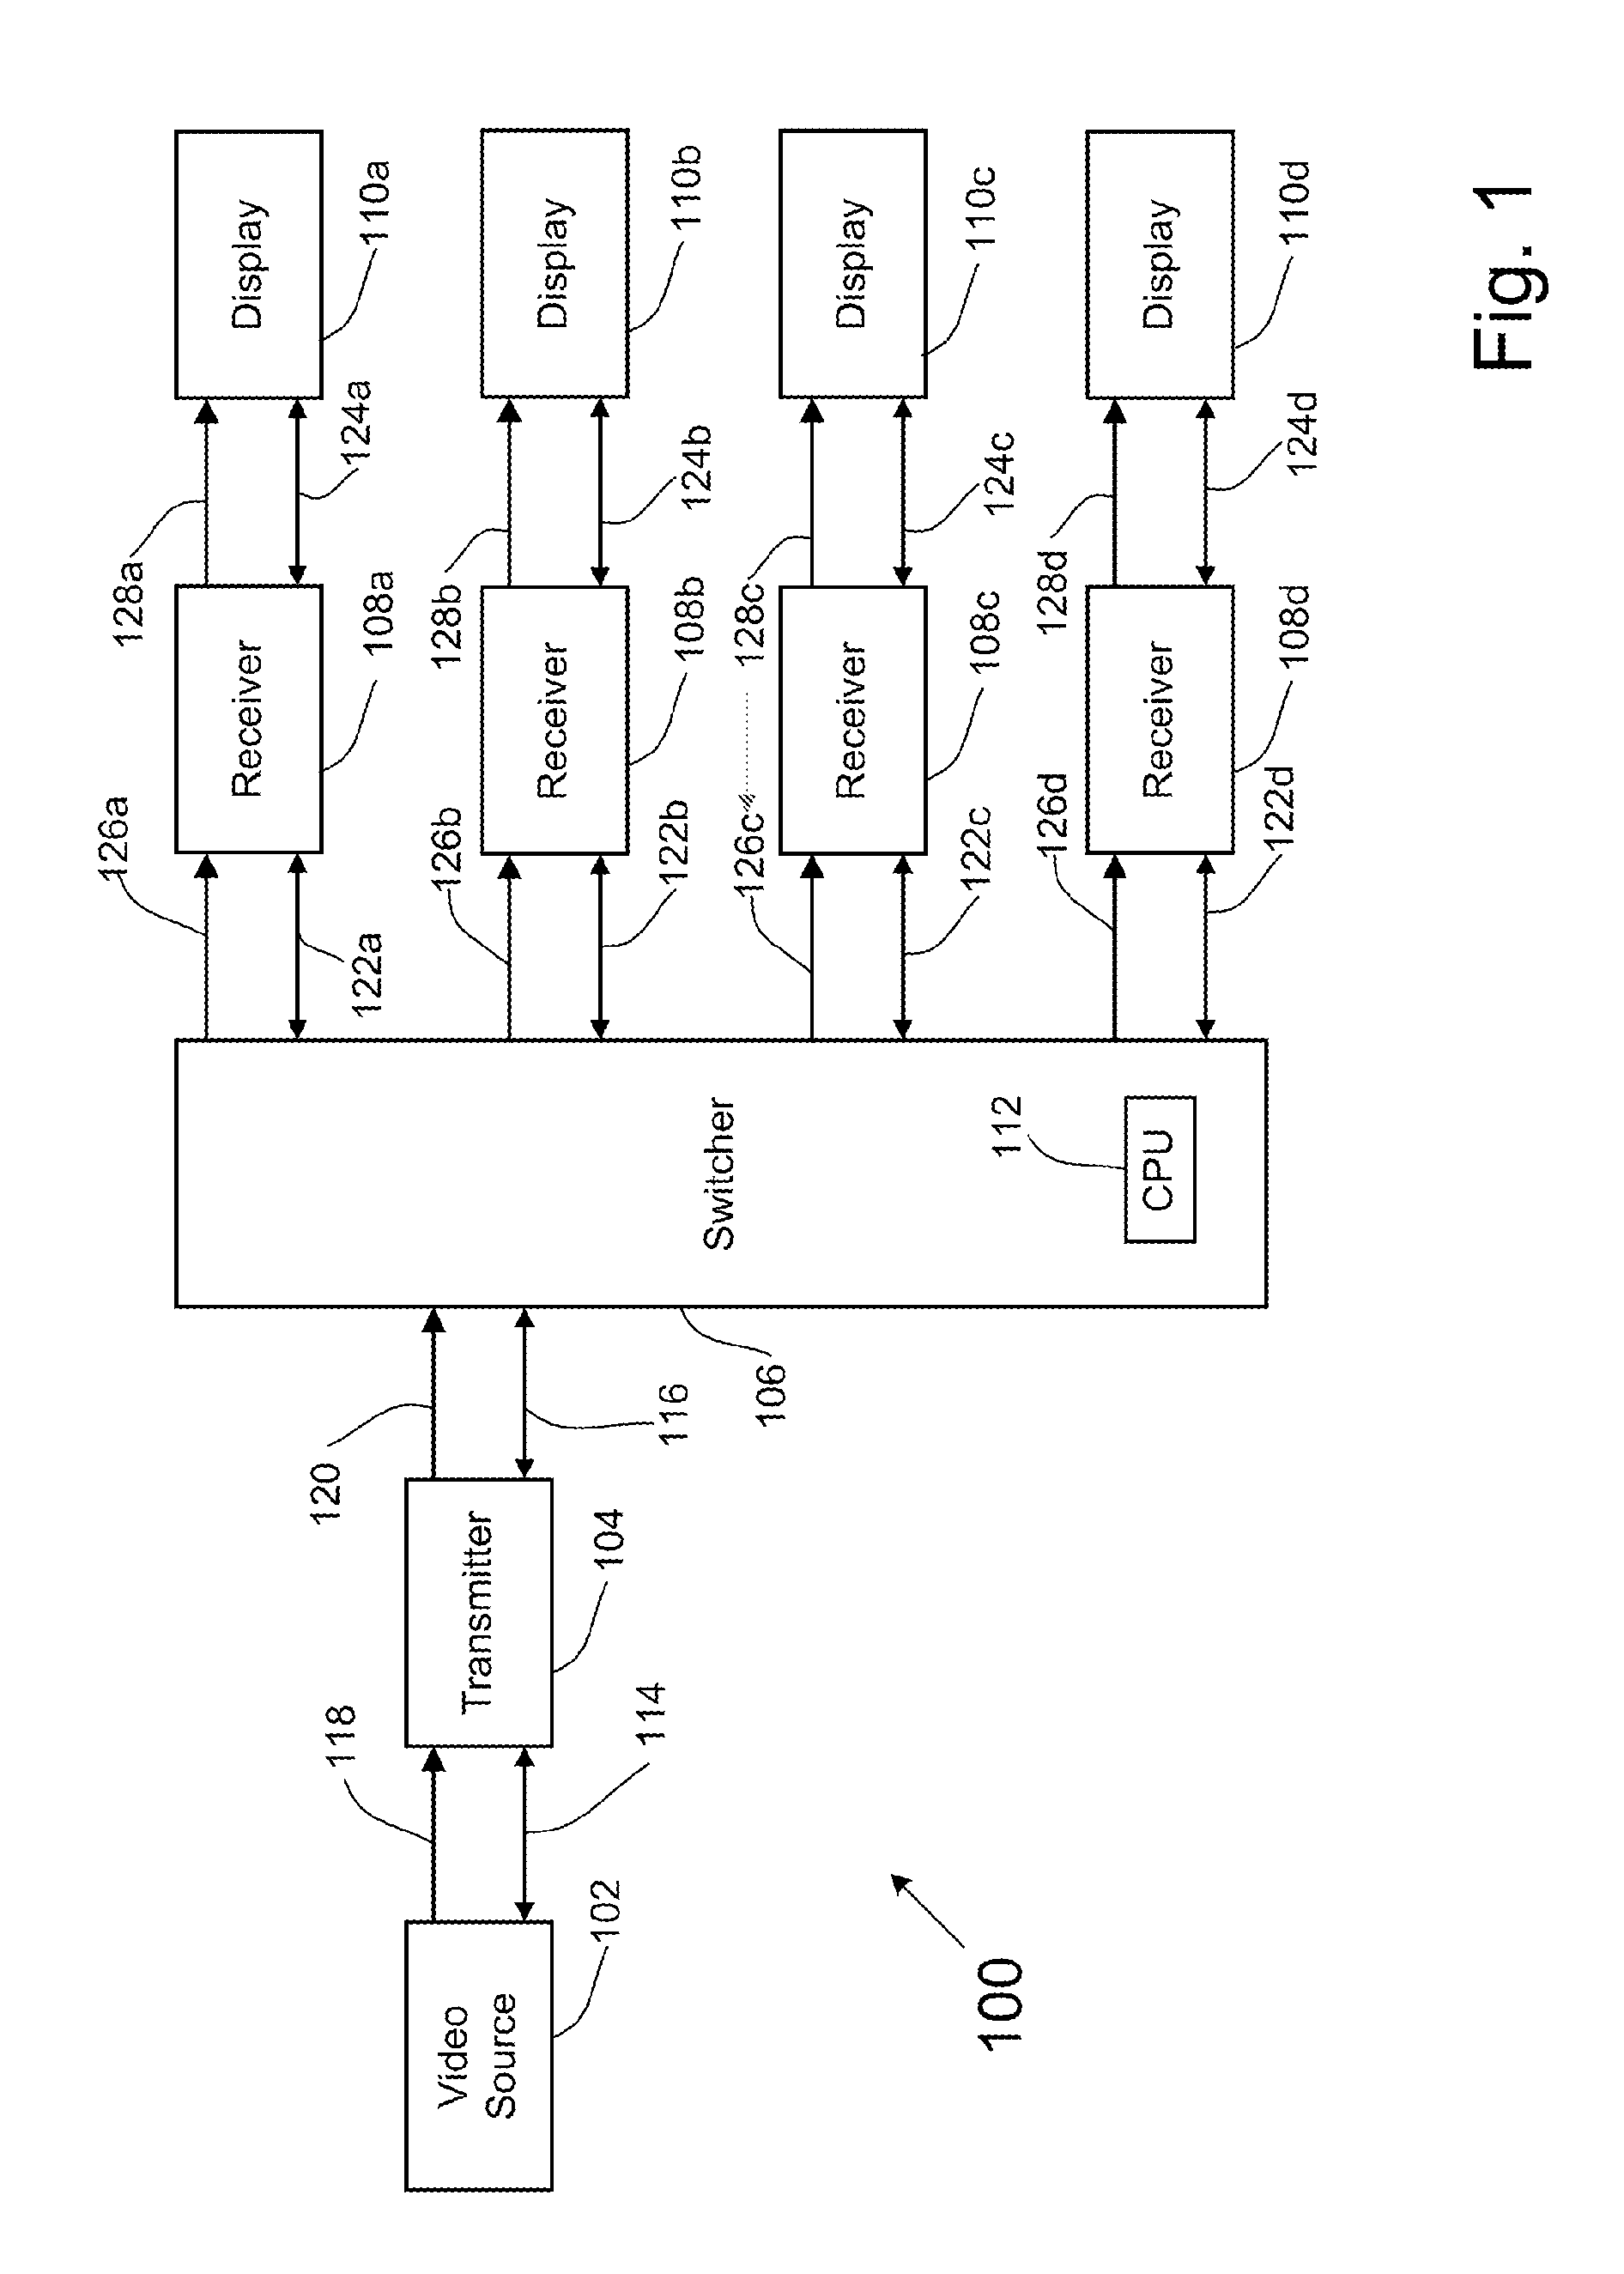 System and Method for Compressing Video and Reformatting the Compressed Video to Simulate Uncompressed Video With a Lower Bandwidth